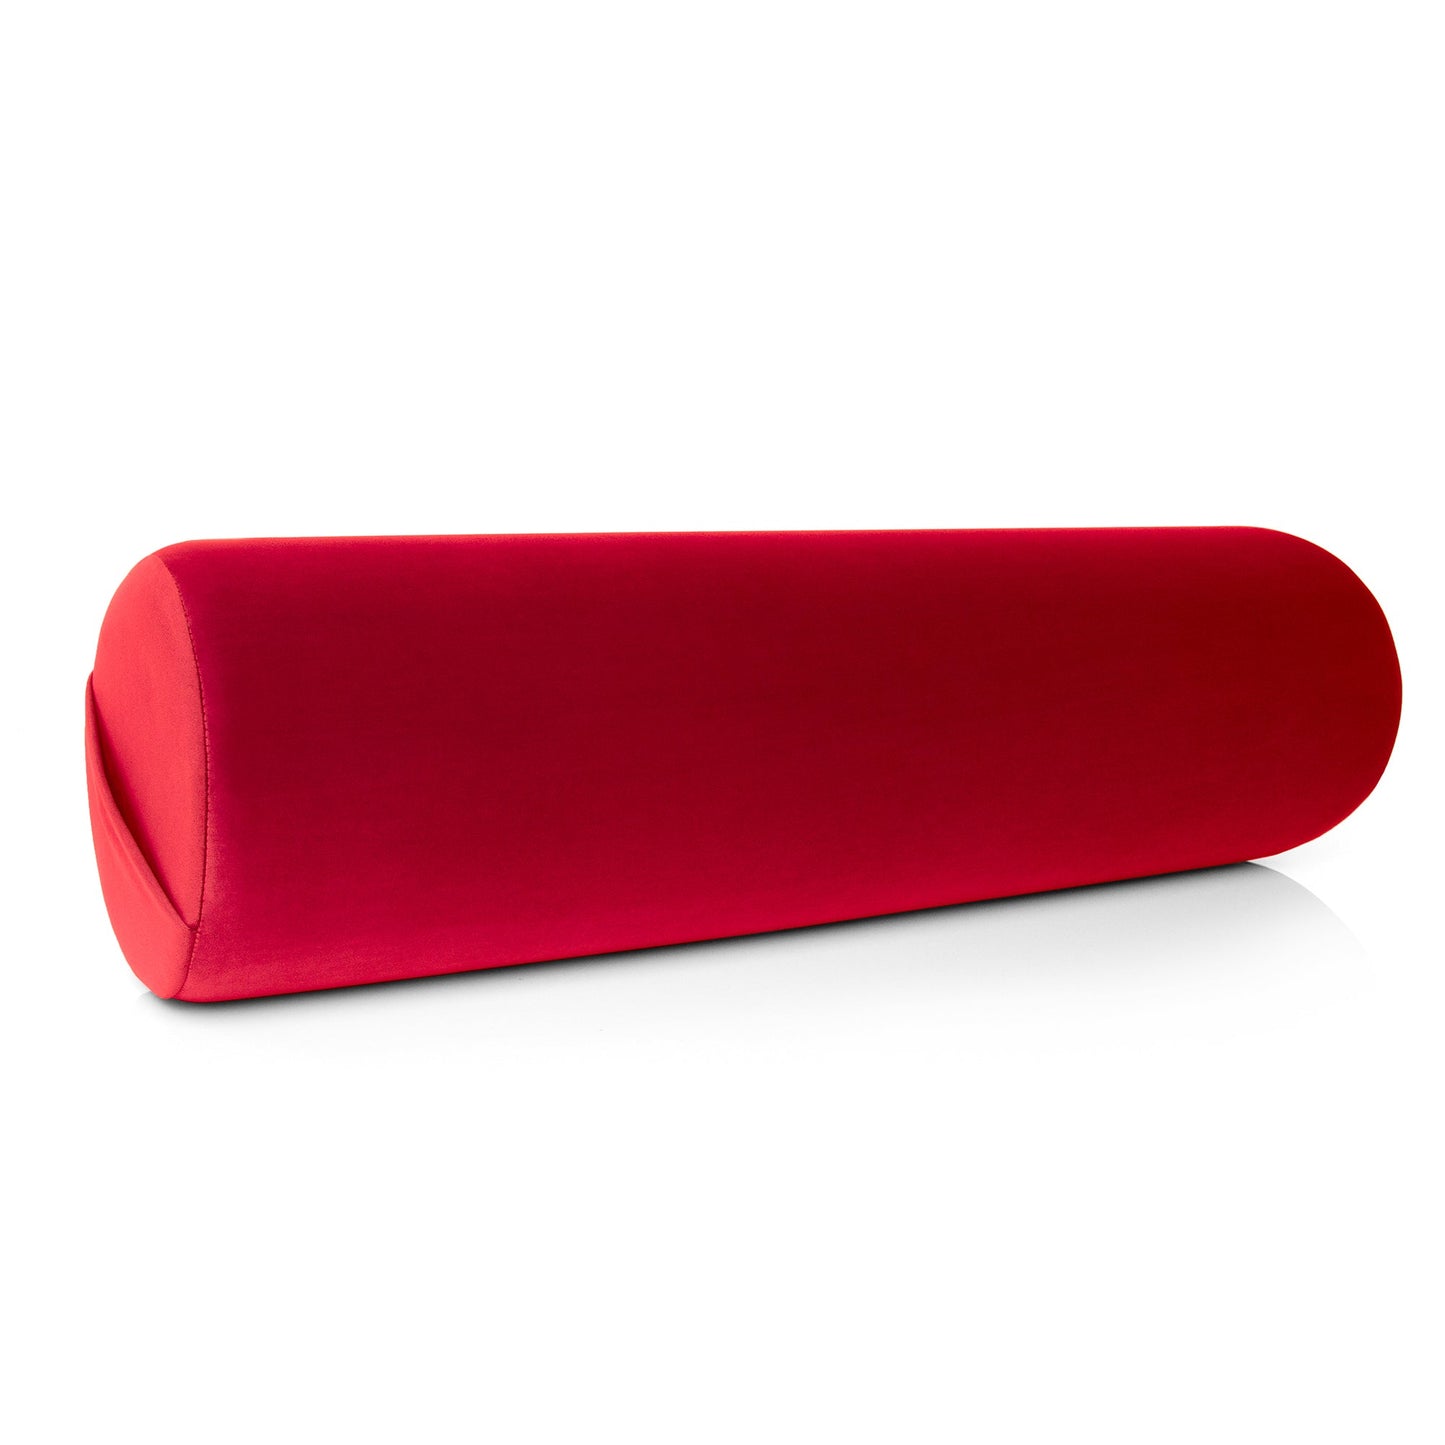 Liberator Decor Whirl Positioning Pillow Large Size Vel Red Liberator Shapes